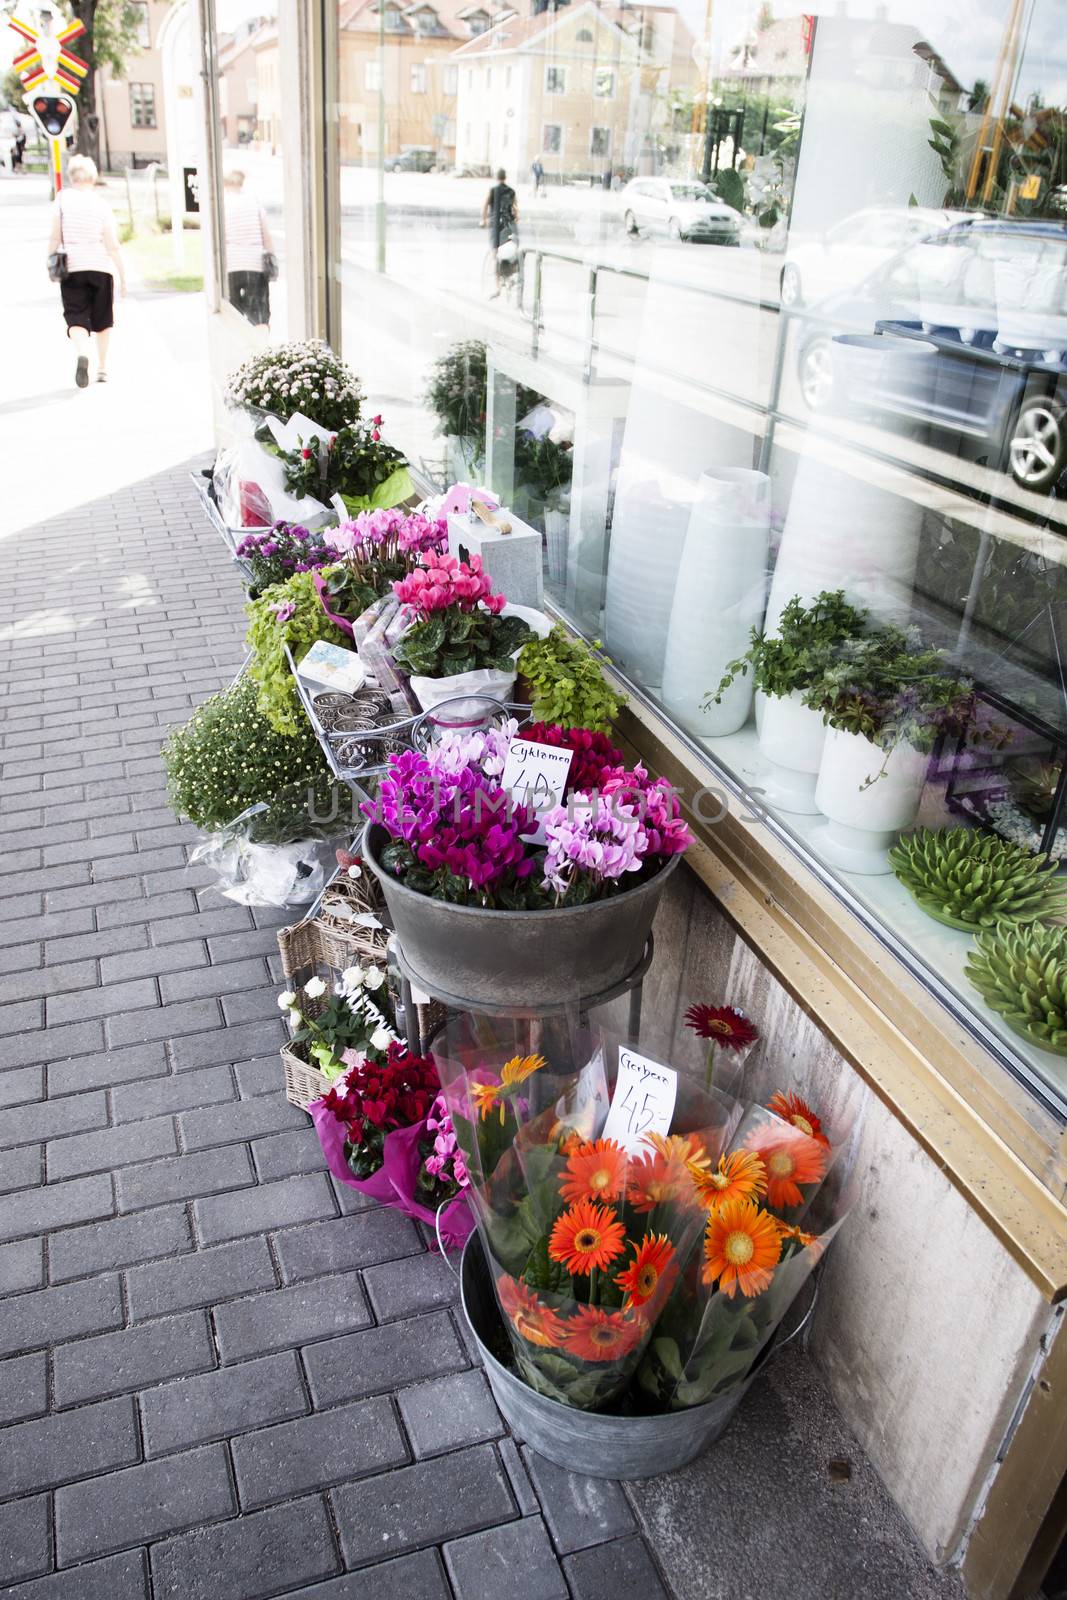 Flowers for sale on the street outside a shop in Sweden